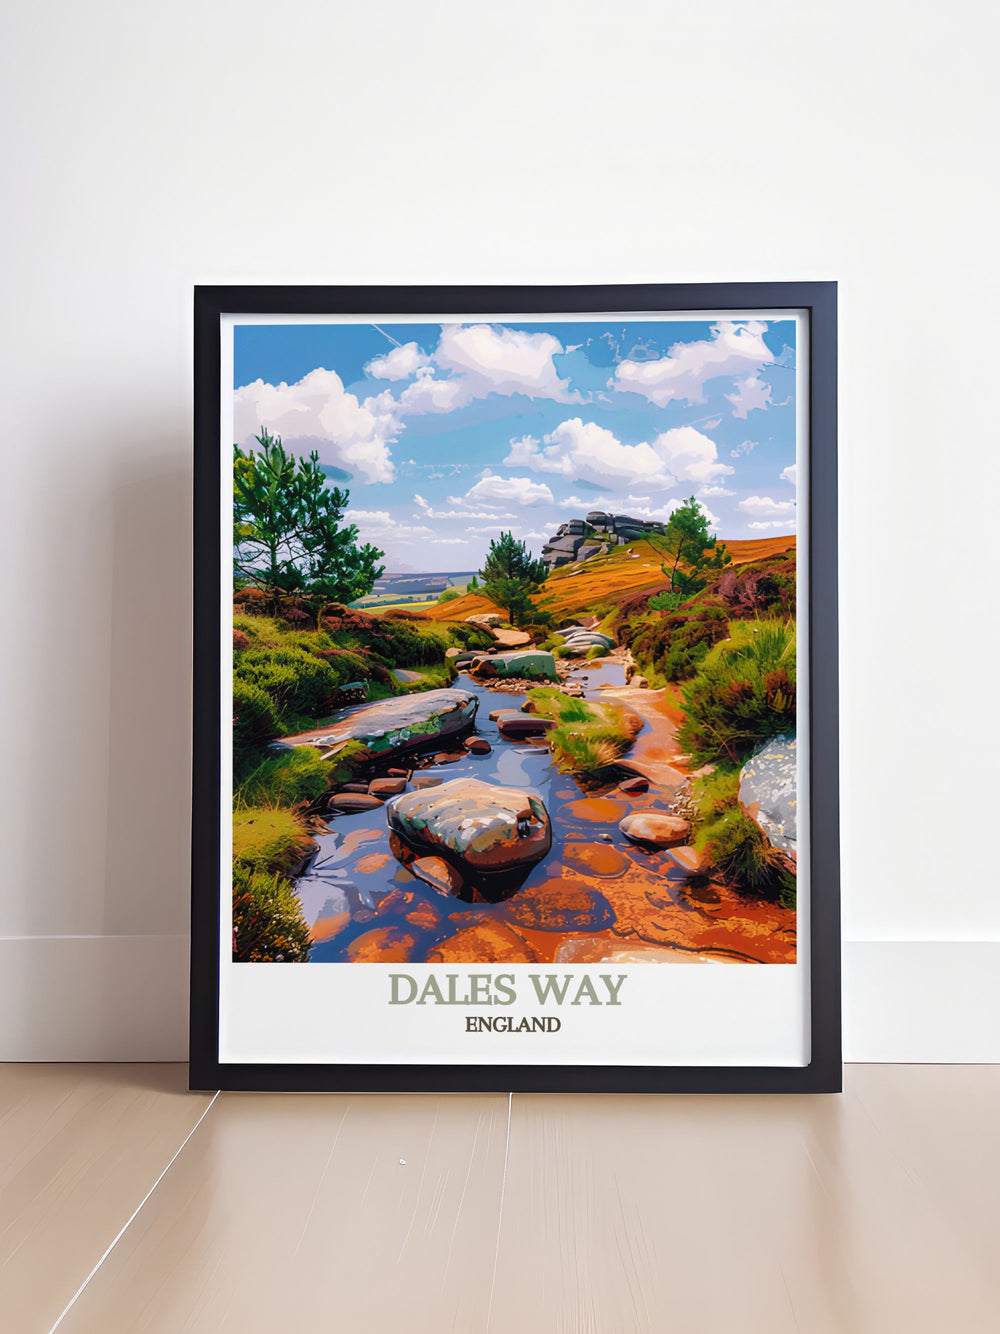 Home decor print illustrating the iconic scenes of Ilkley Moor, highlighting the rich history and breathtaking views of Yorkshires countryside.